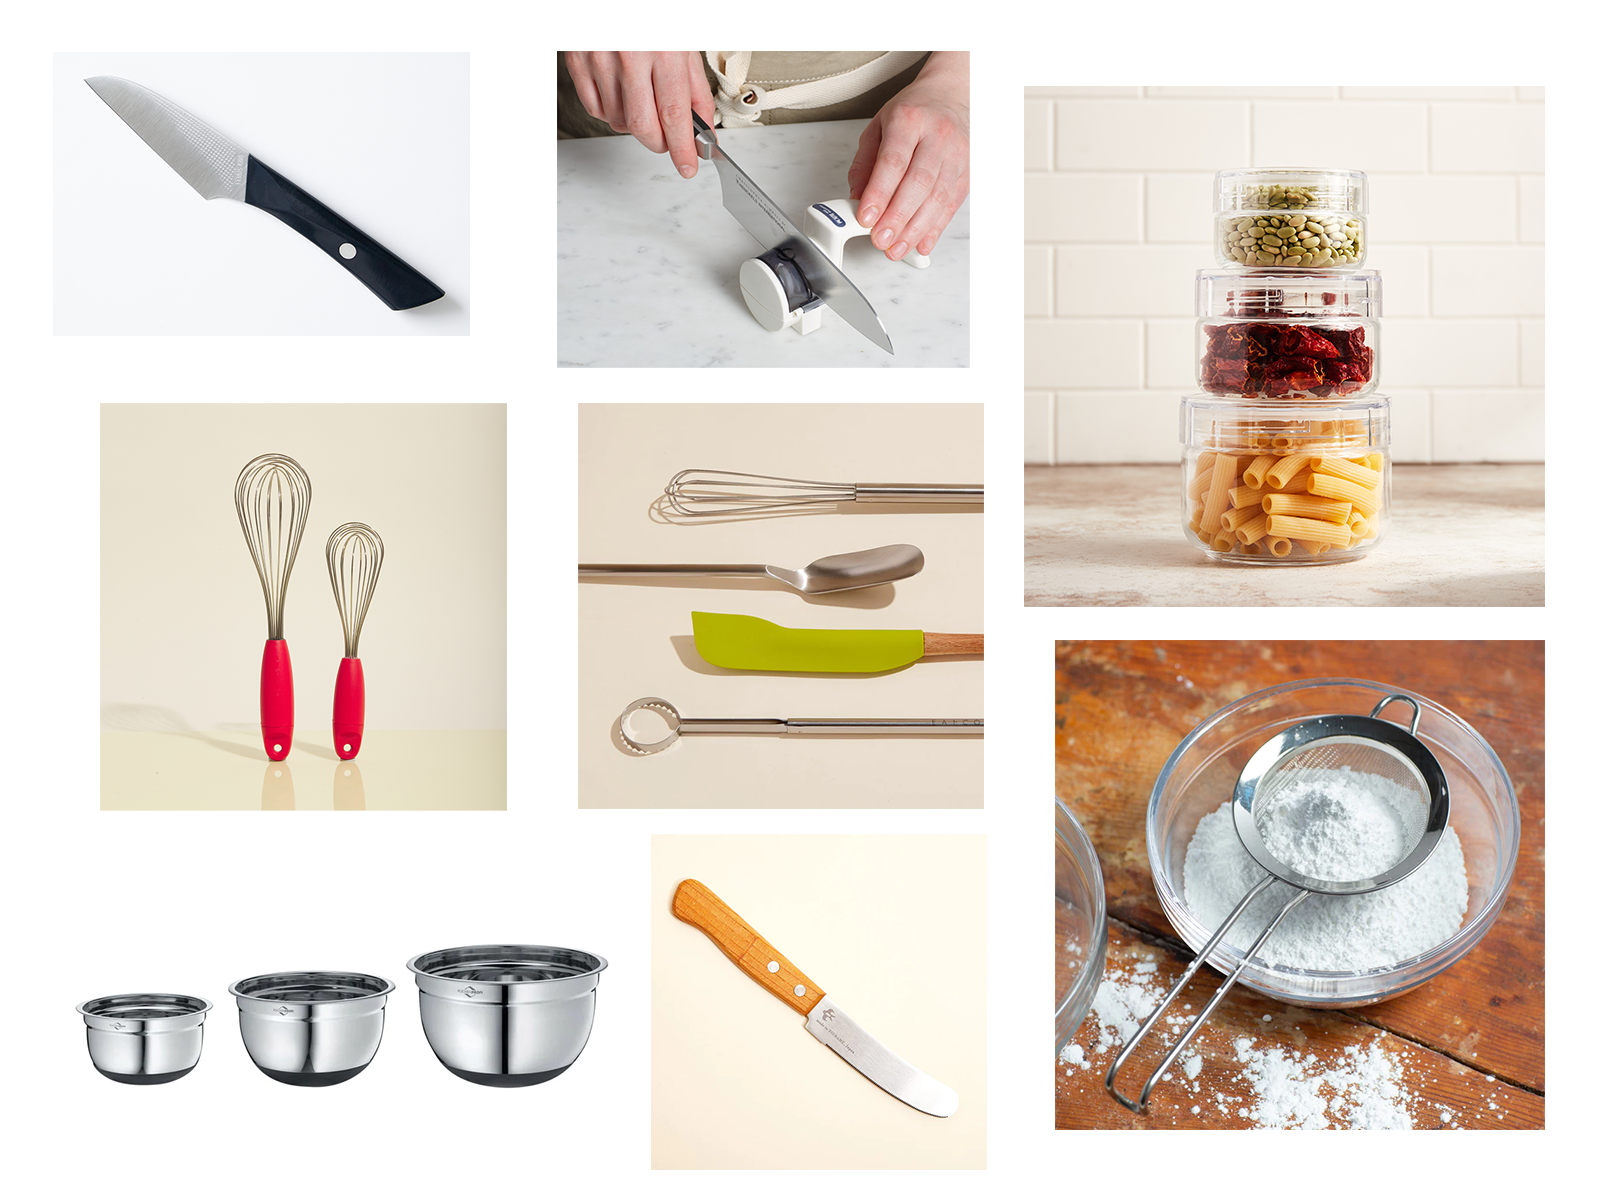 You Can Buy A Tiny Cooking Kit On